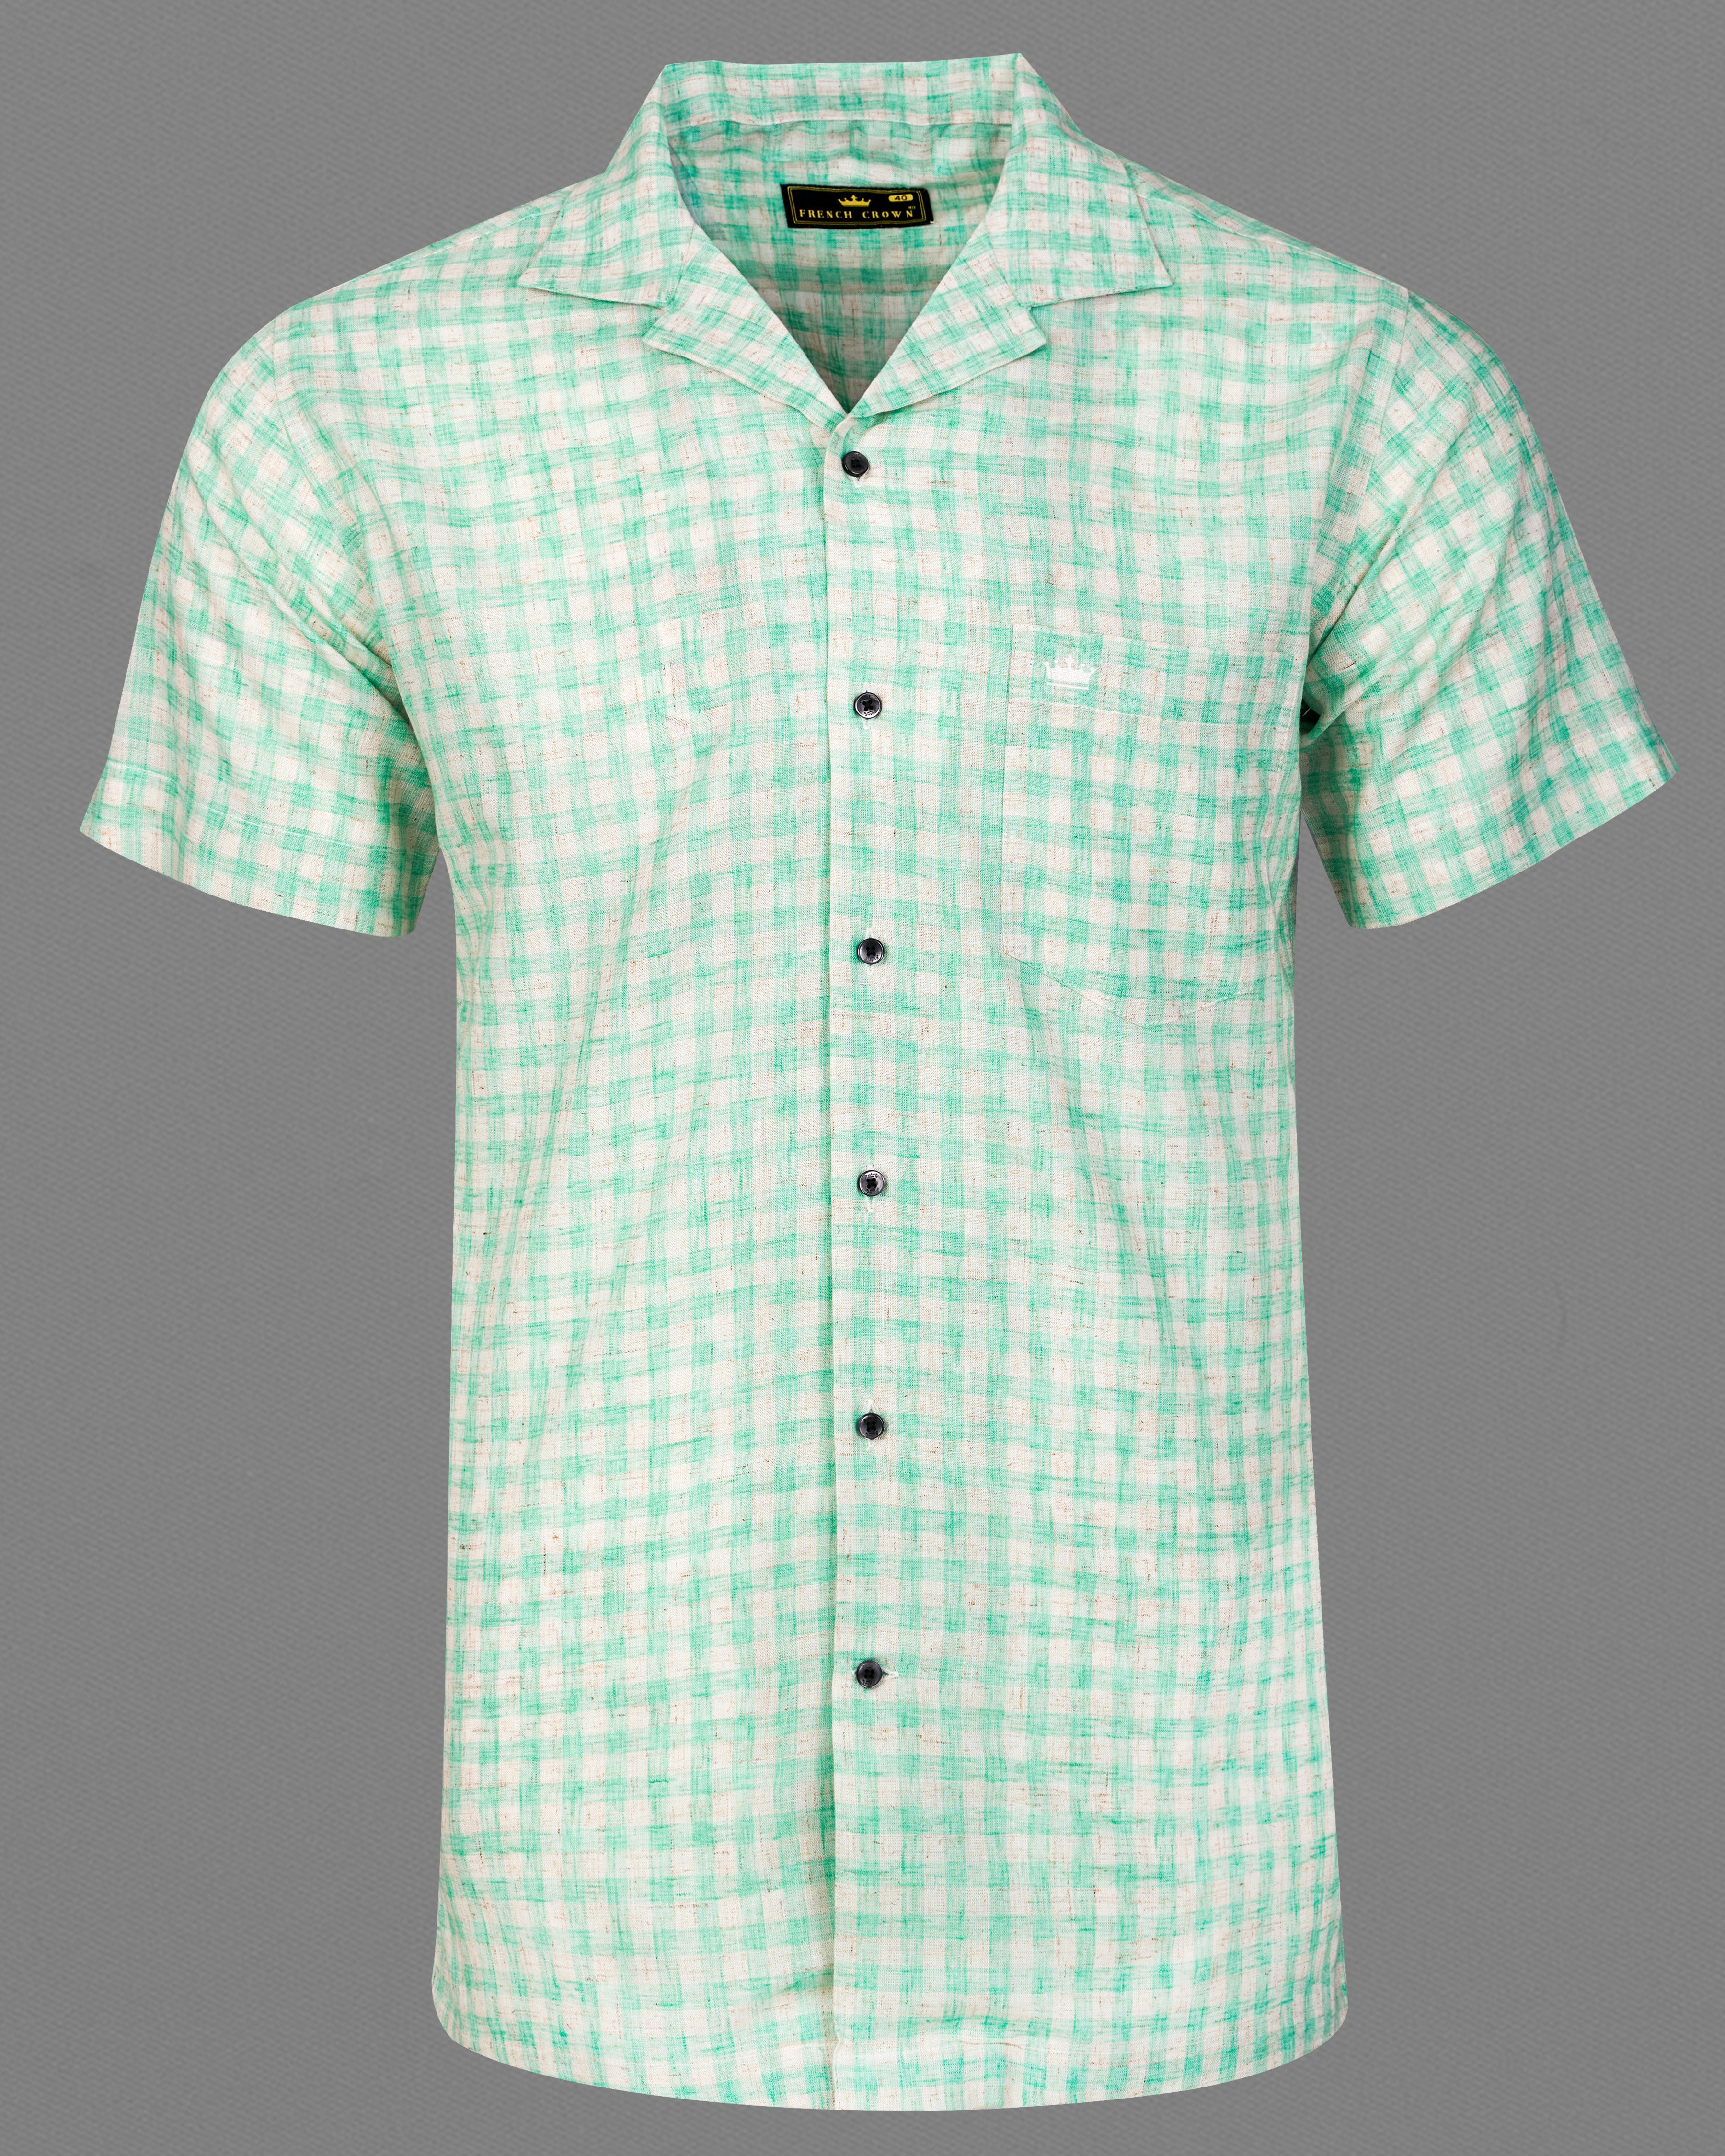 Turquoise Green and Mercury Gray Checkered Half-Sleeved Luxurious Linen Shirt 9699-CC-BLK-SS-38, 9699-CC-BLK-SS-39, 9699-CC-BLK-SS-40, 9699-CC-BLK-SS-42, 9699-CC-BLK-SS-44, 9699-CC-BLK-SS-46, 9699-CC-BLK-SS-48, 9699-CC-BLK-SS-50, 9699-CC-BLK-SS-52